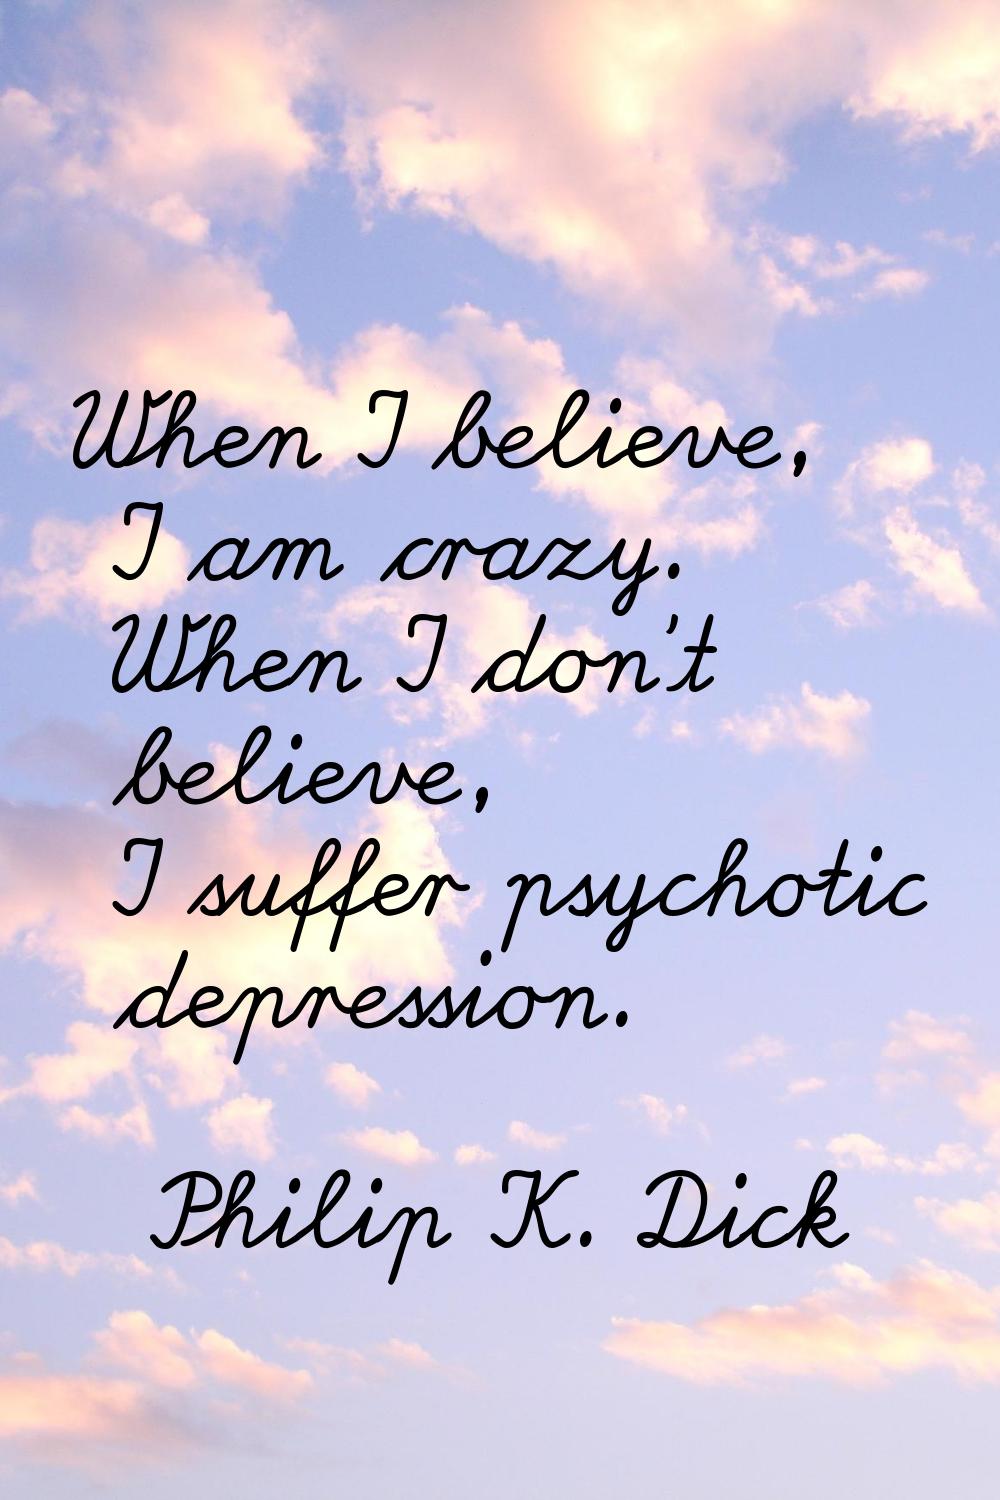 When I believe, I am crazy. When I don't believe, I suffer psychotic depression.